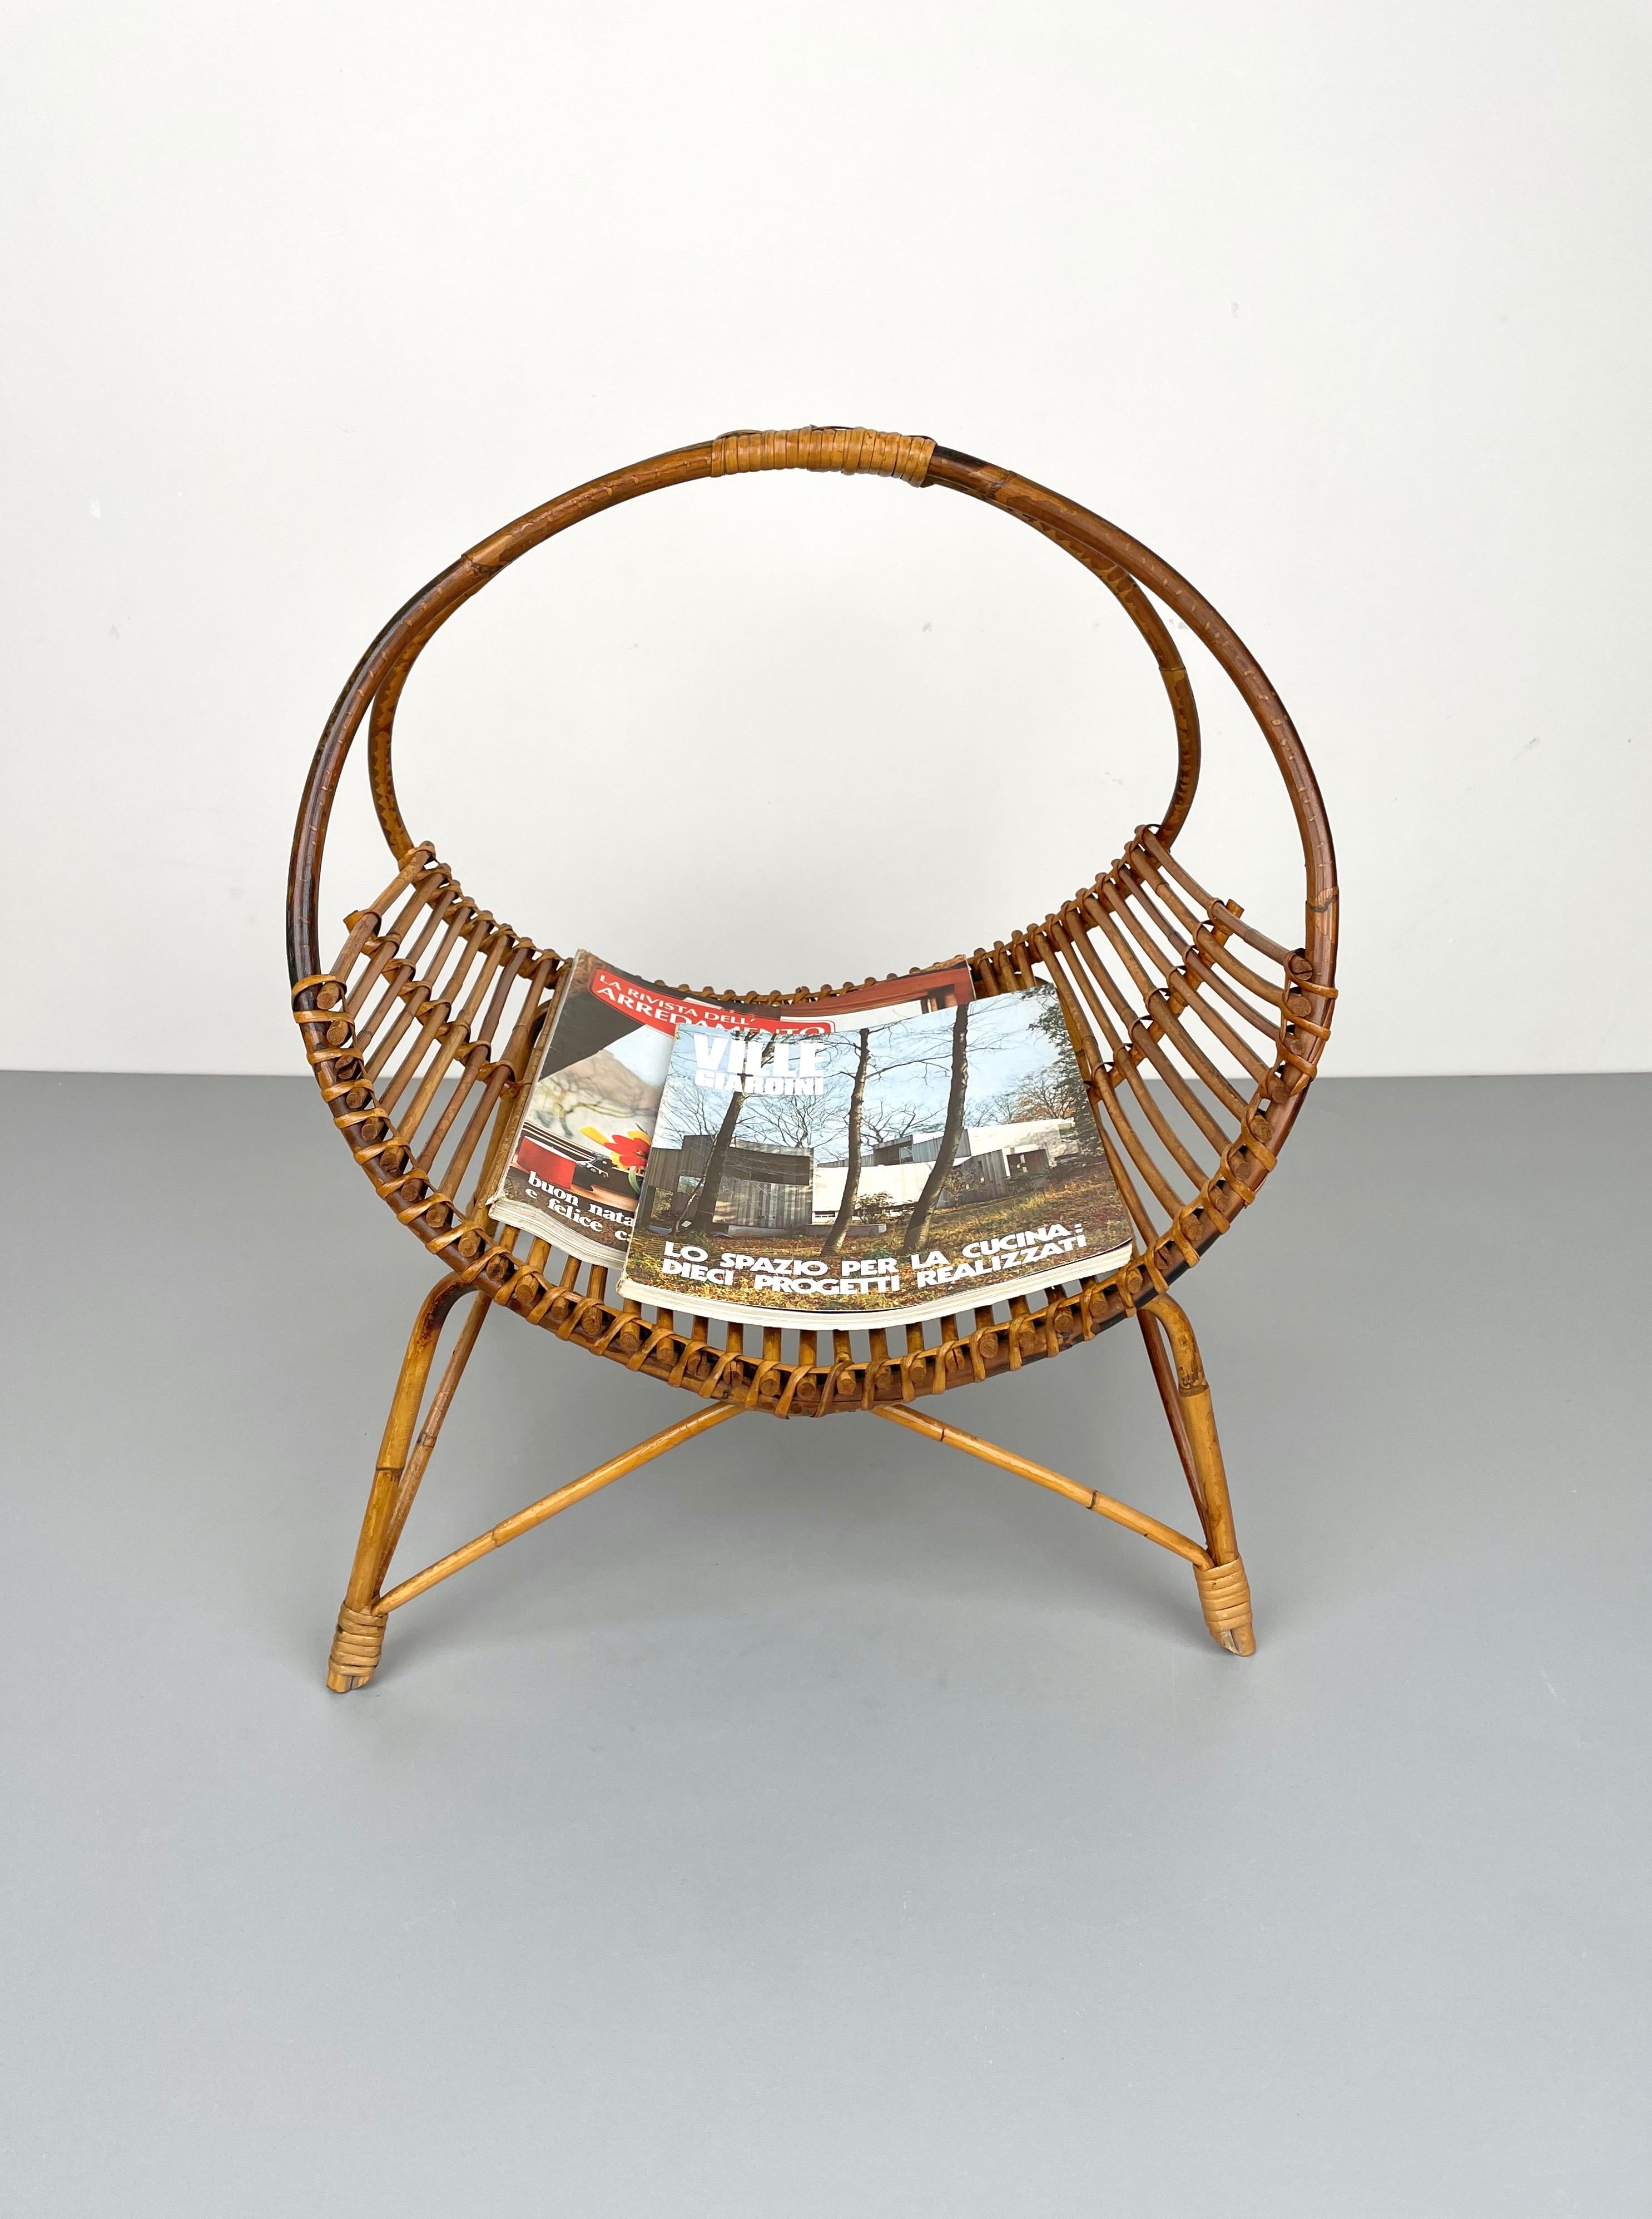 Rattan & Bamboo Curved Magazine Rack, Italy, 1960s For Sale 1